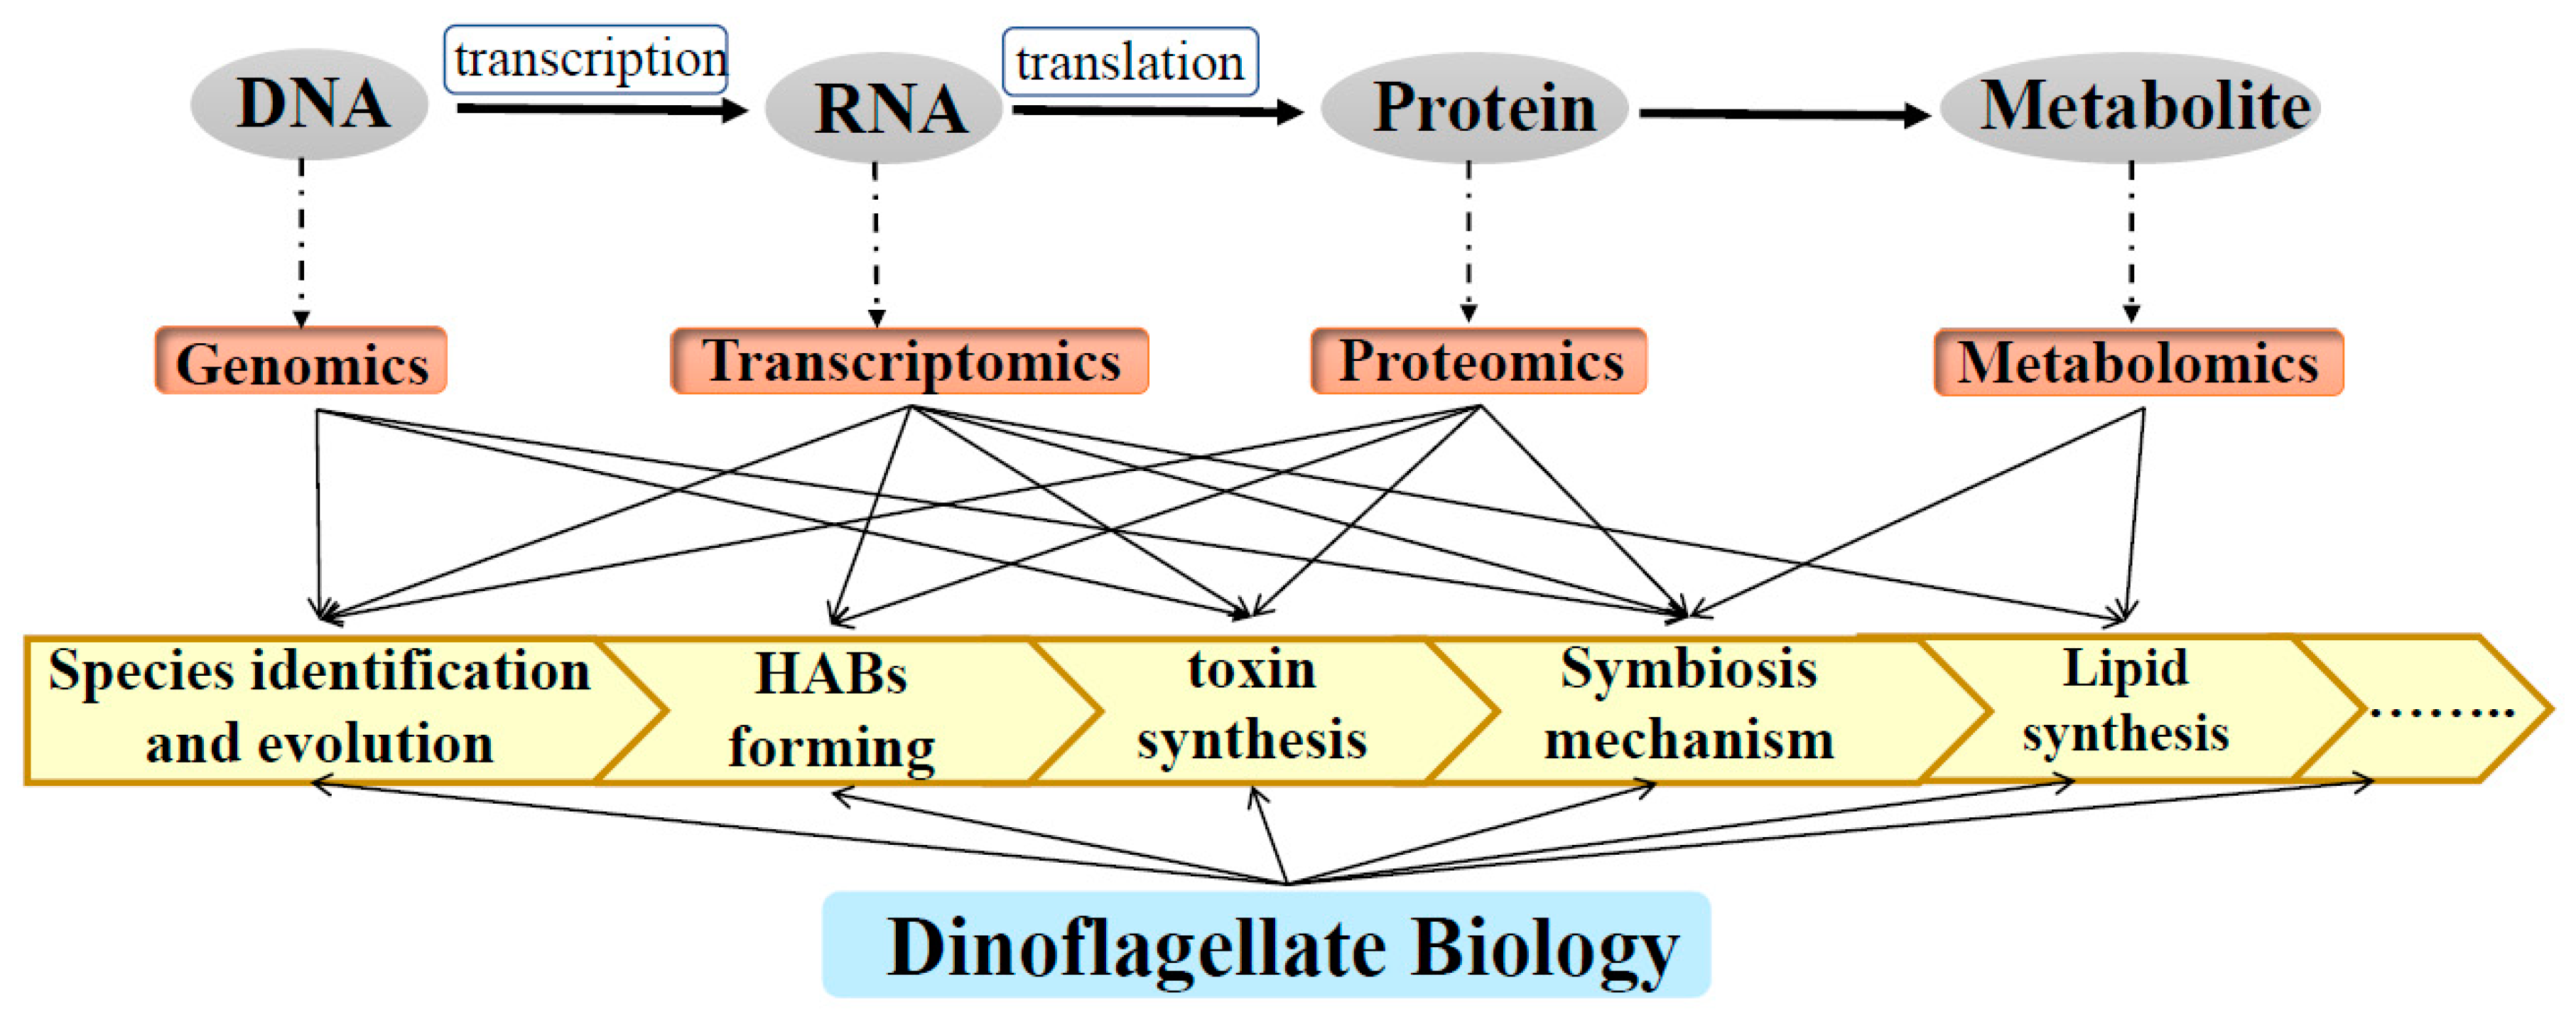 Microorganisms | Free Full-Text | Omics Analysis for Dinoflagellates  Biology Research